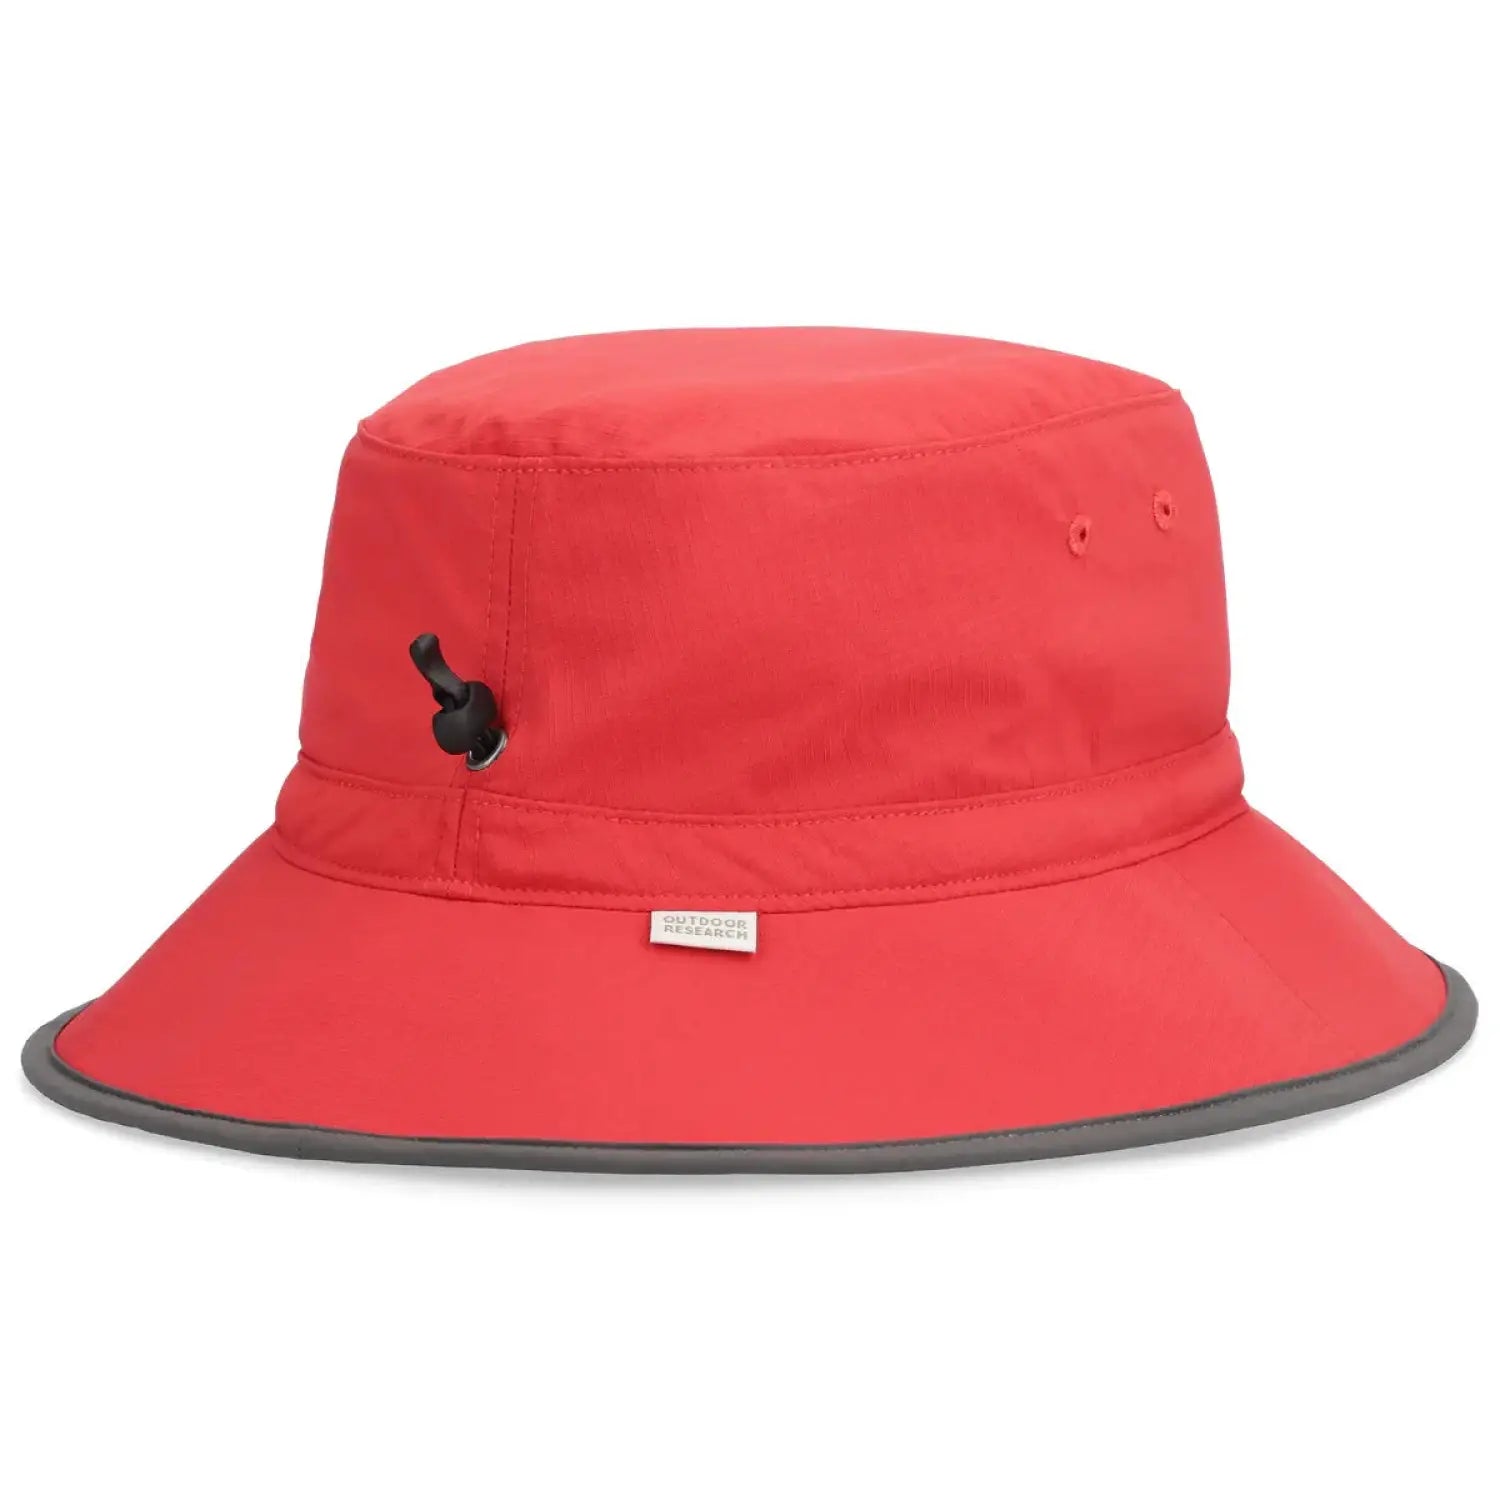 Outdoor Research® Sun Bucket Hat shown in the Moondust color option. Back view.